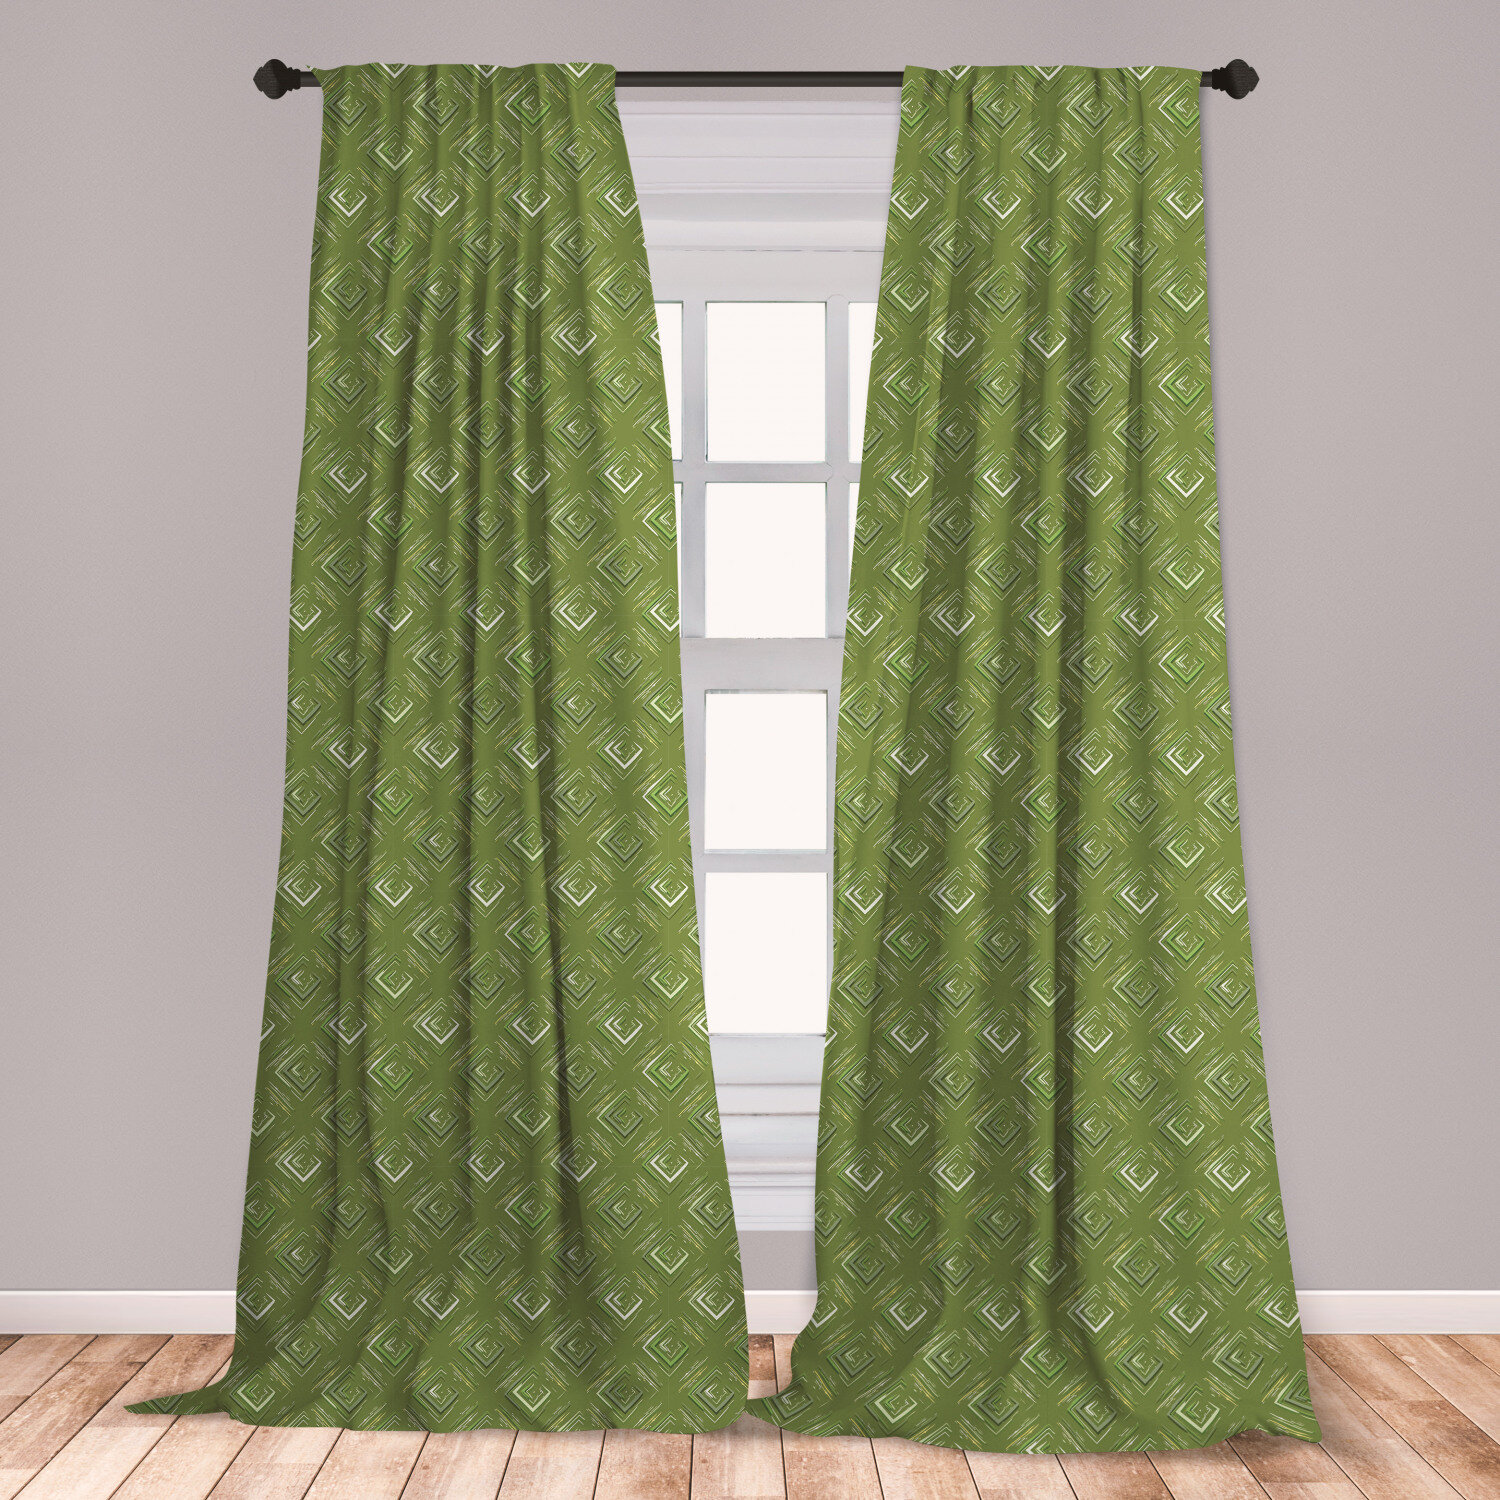 East Urban Home Ambesonne Olive Green Curtains